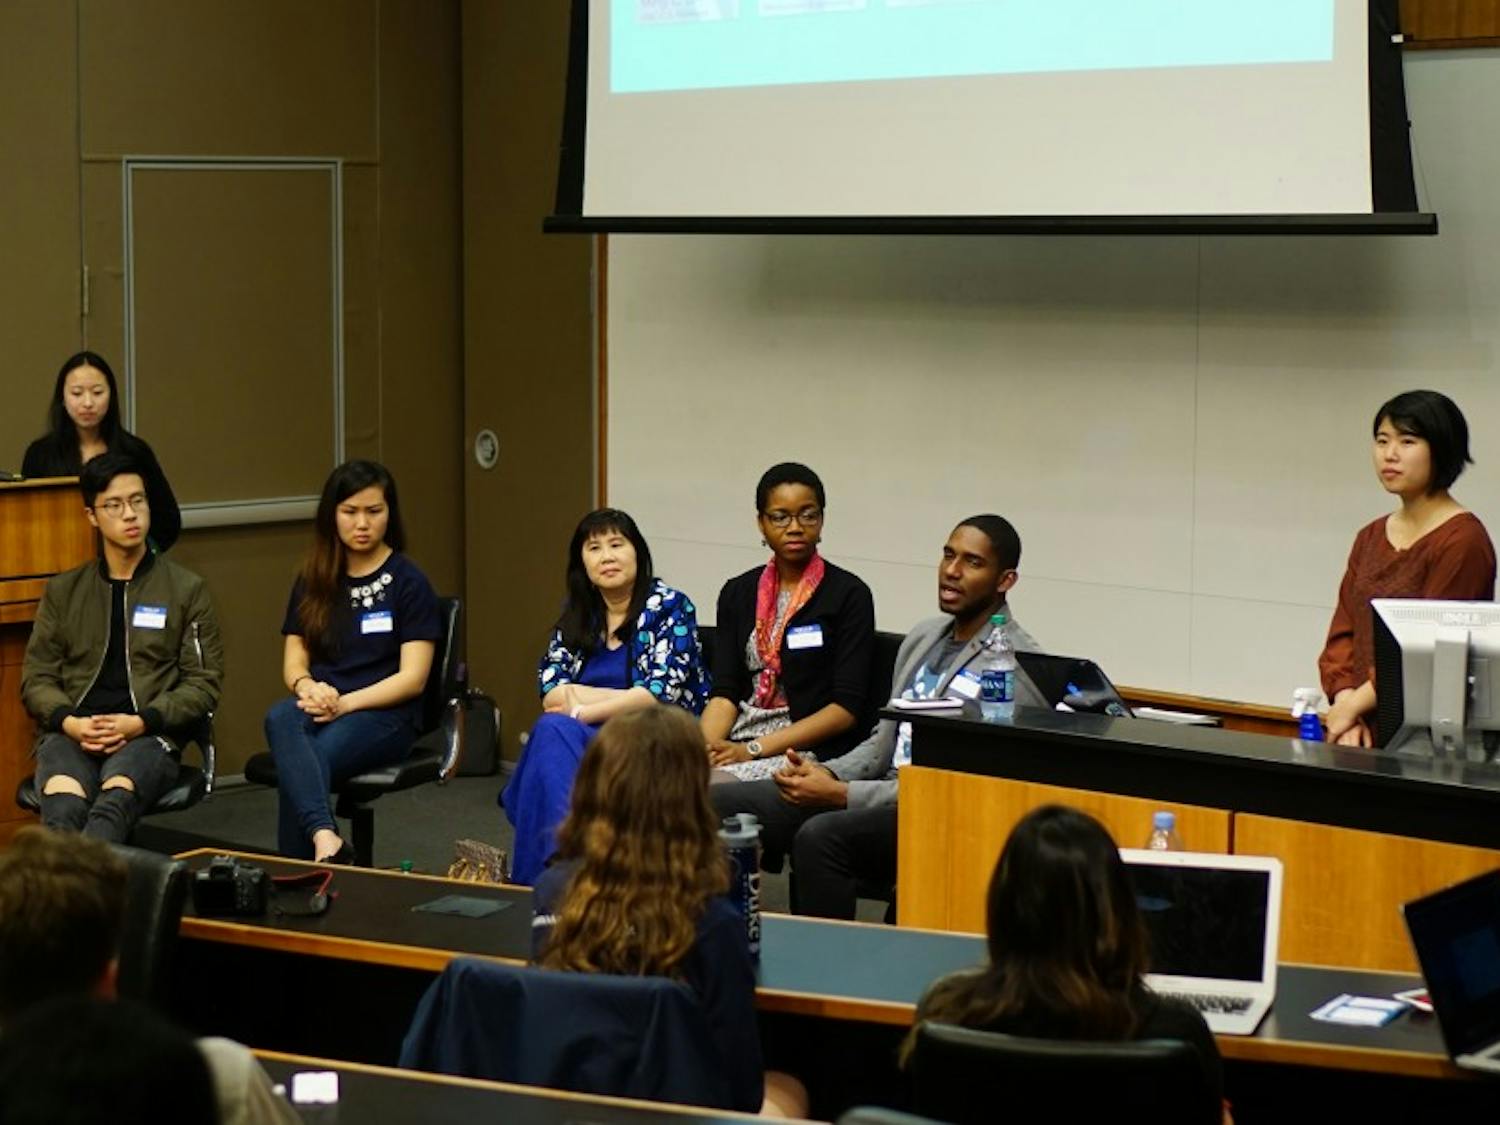 Panelists imparted advice for students planning&nbsp;to pursue careers in technology and noted the importance of diversity in workplaces.